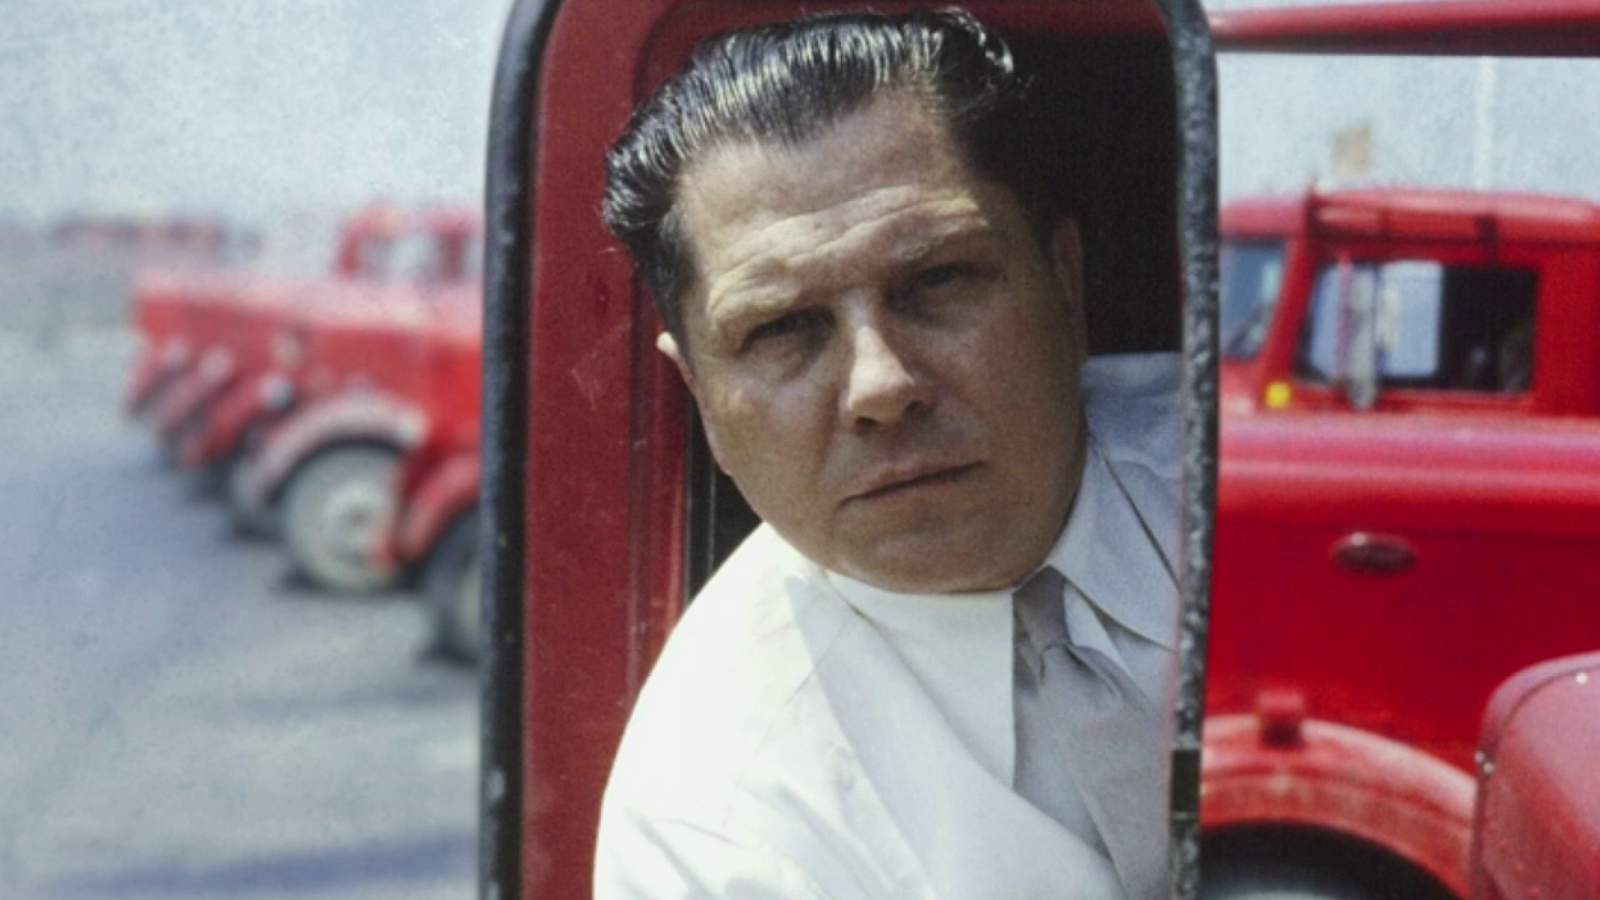 ‘The Hoffa Wars’ author has new theory about where Jimmy Hoffa’s remains are